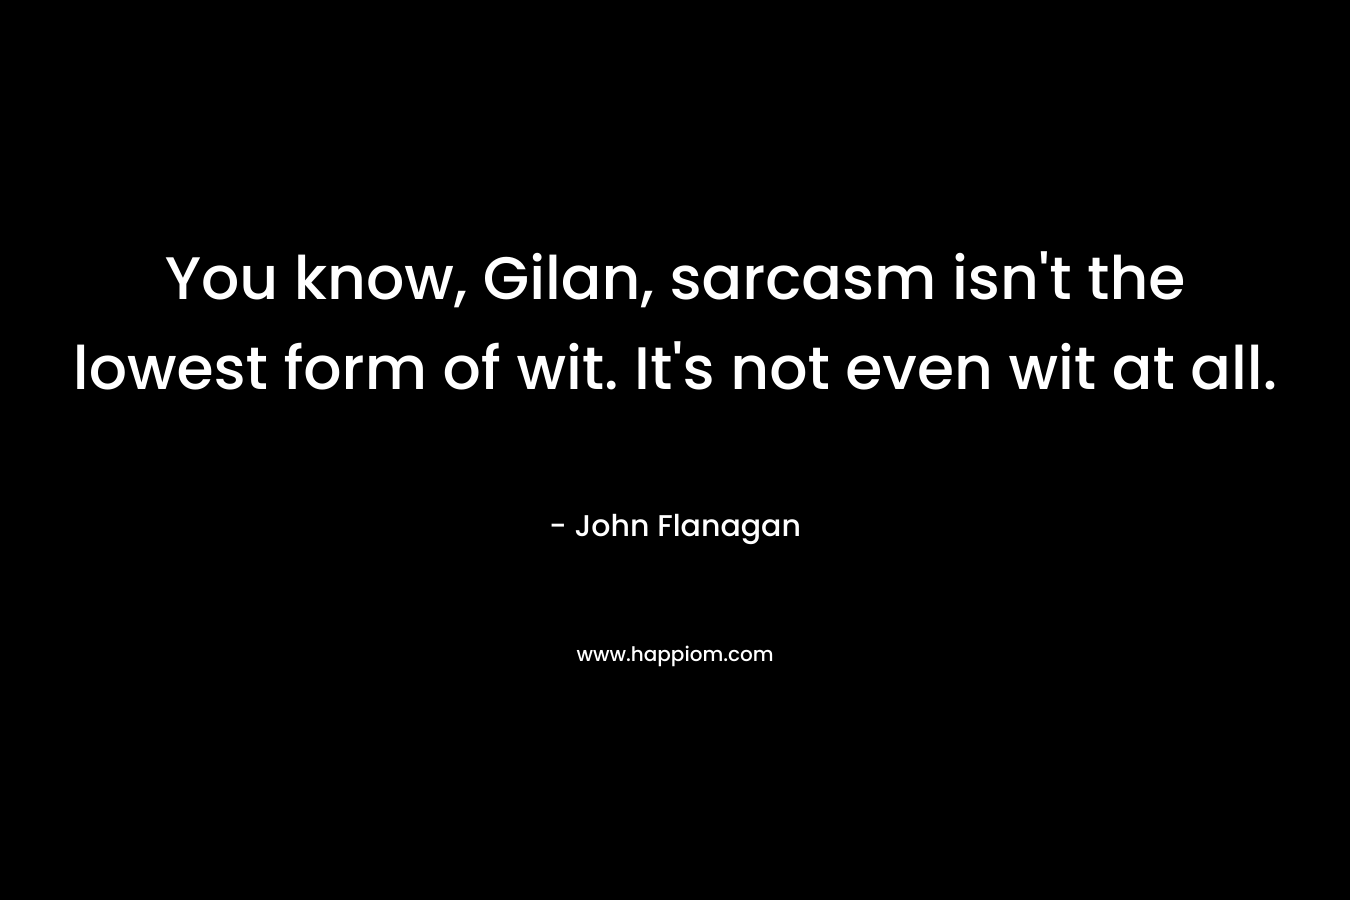 You know, Gilan, sarcasm isn’t the lowest form of wit. It’s not even wit at all. – John Flanagan